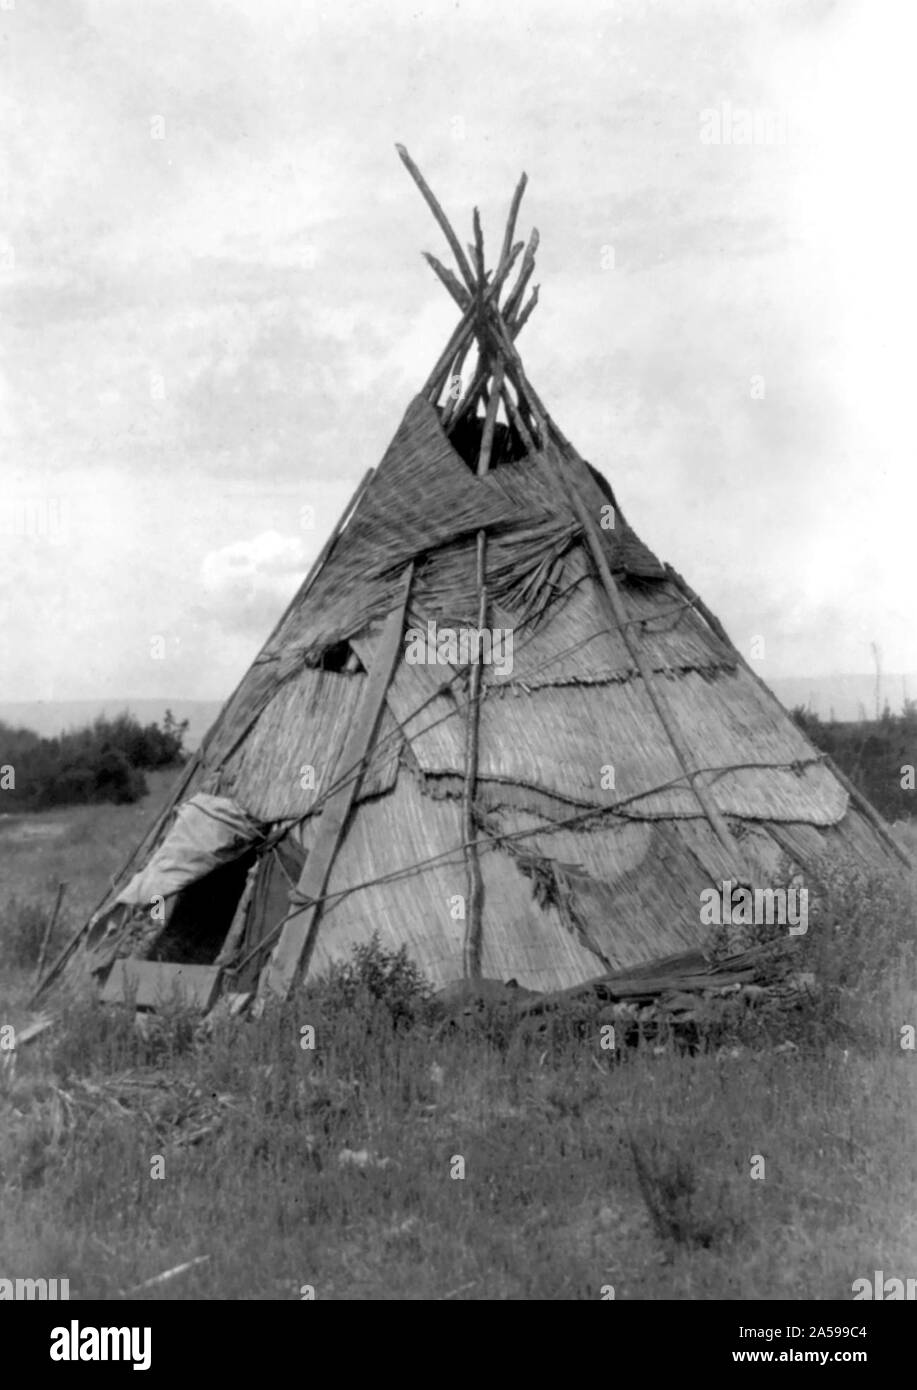 Edward S. Curits Native American Indians - Photograph shows reed mat covered tepee in grassy field, Washington ca. 1910 Stock Photo